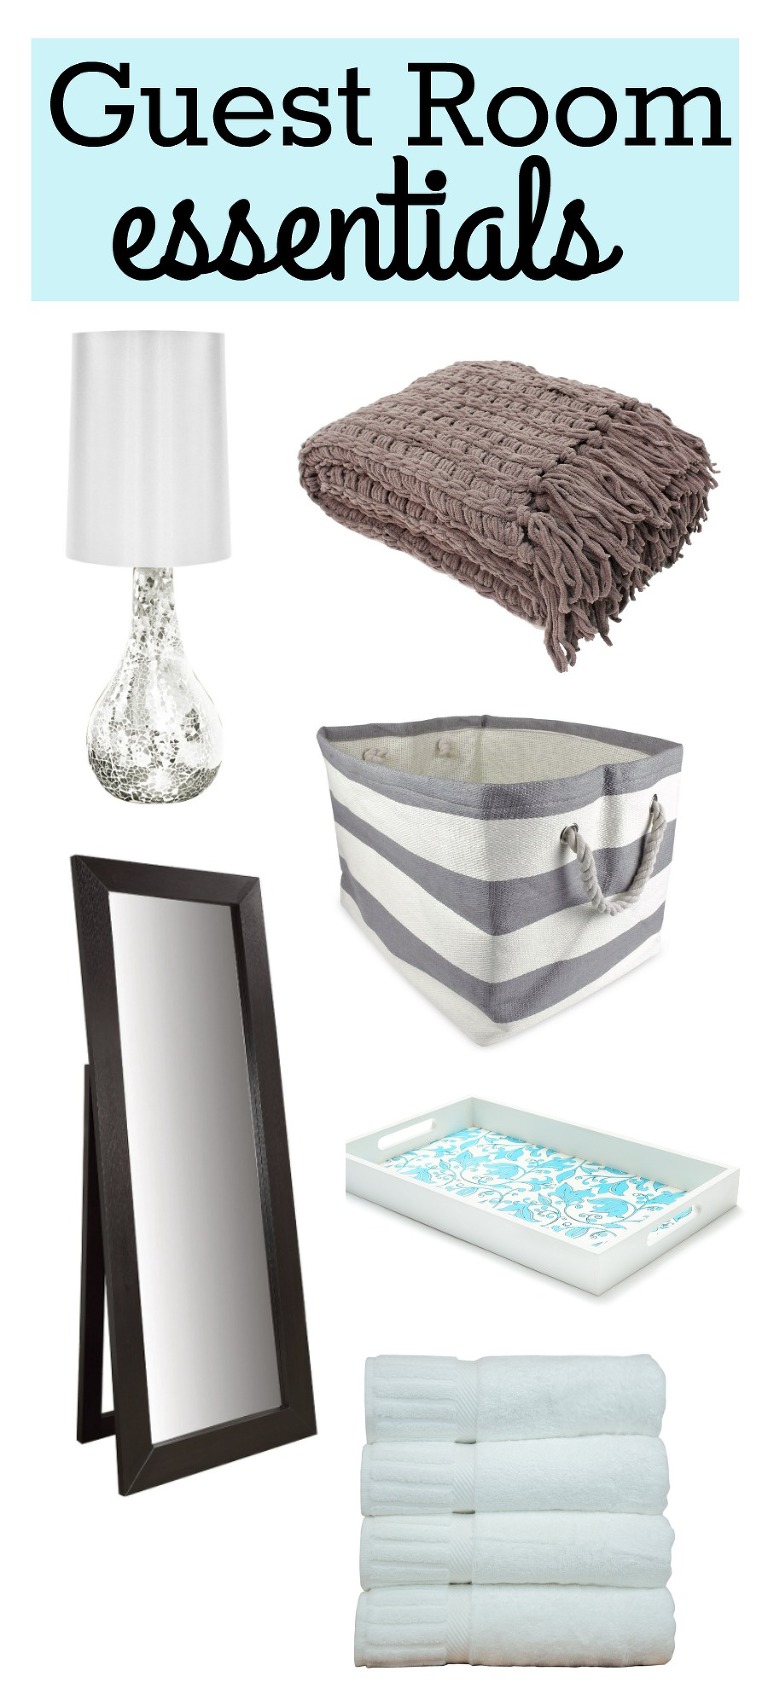 Guest room essentials to make a cozy and comfortable room for your guests